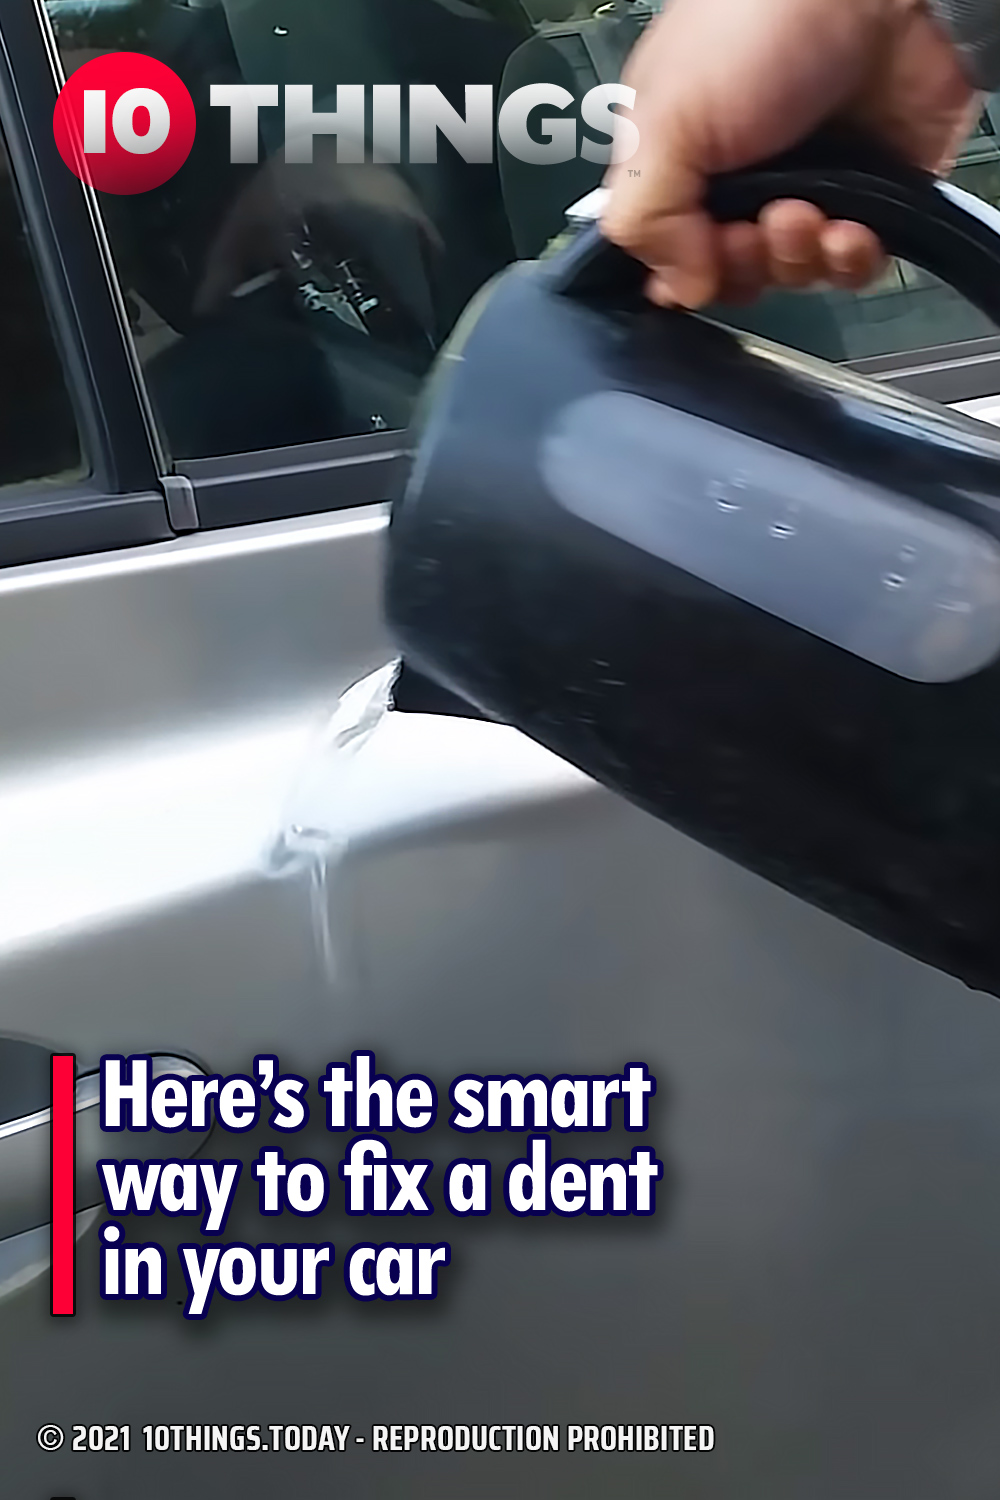 Here’s the smart way to fix a dent in your car